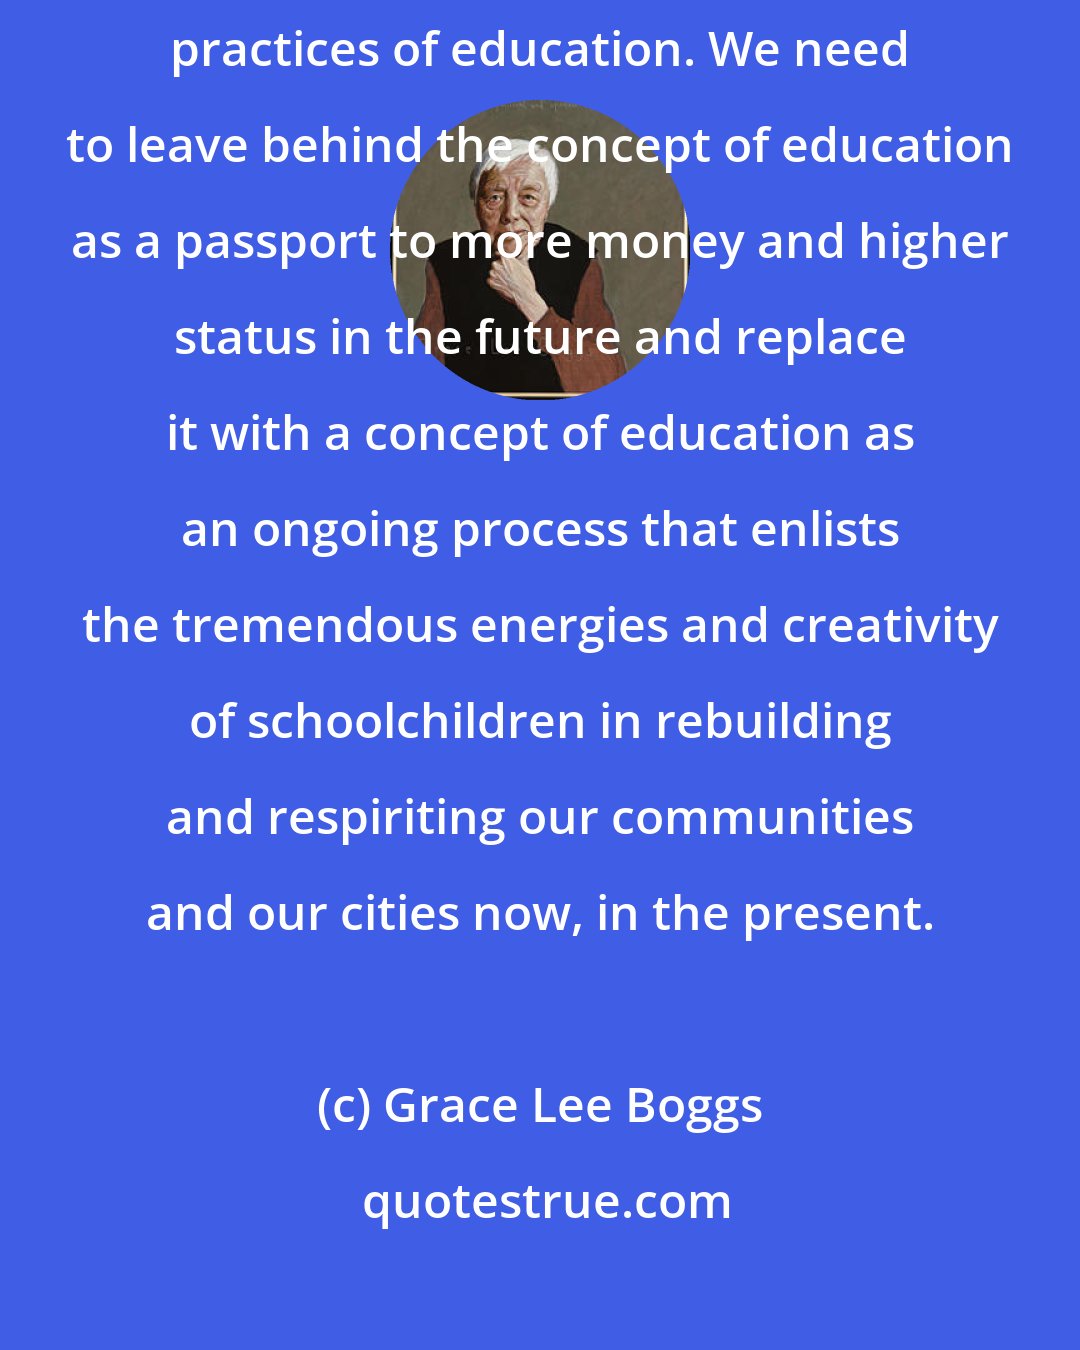 Grace Lee Boggs: We urgently need a paradigm shift in our concept of the purposes and practices of education. We need to leave behind the concept of education as a passport to more money and higher status in the future and replace it with a concept of education as an ongoing process that enlists the tremendous energies and creativity of schoolchildren in rebuilding and respiriting our communities and our cities now, in the present.